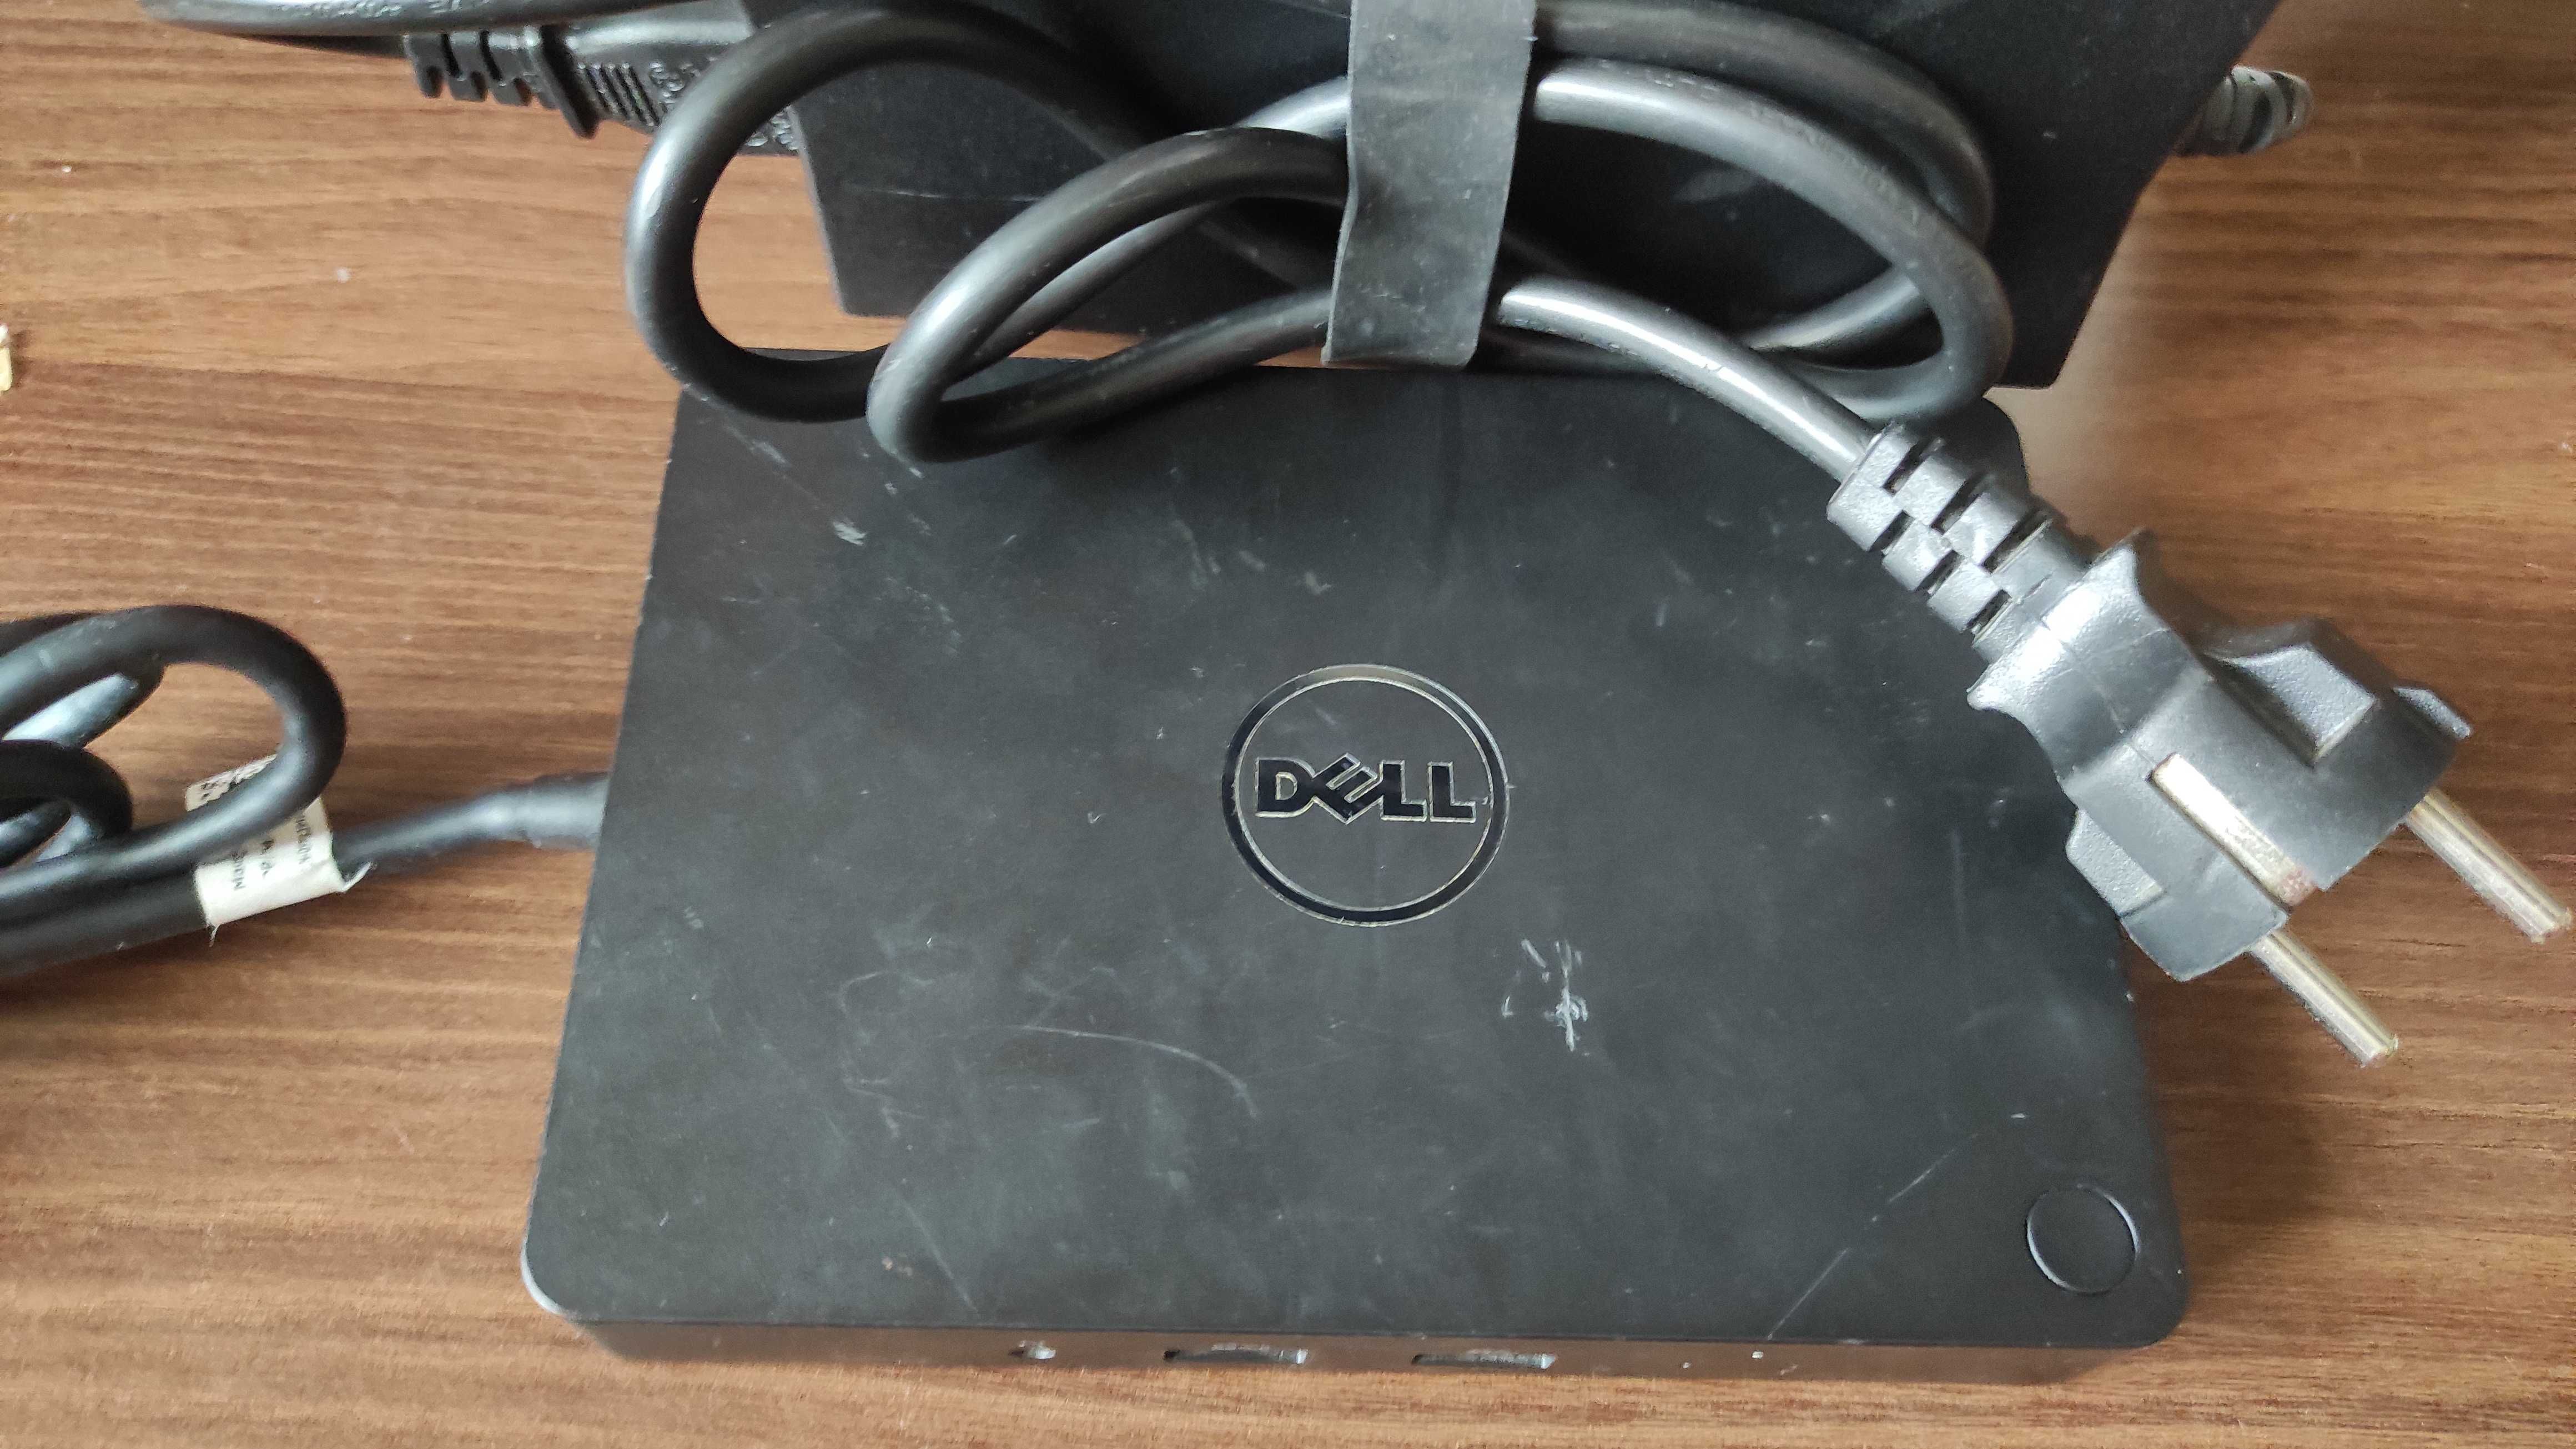 docking station dell tip C WD15 K17A001 alim. 130w perfect functional